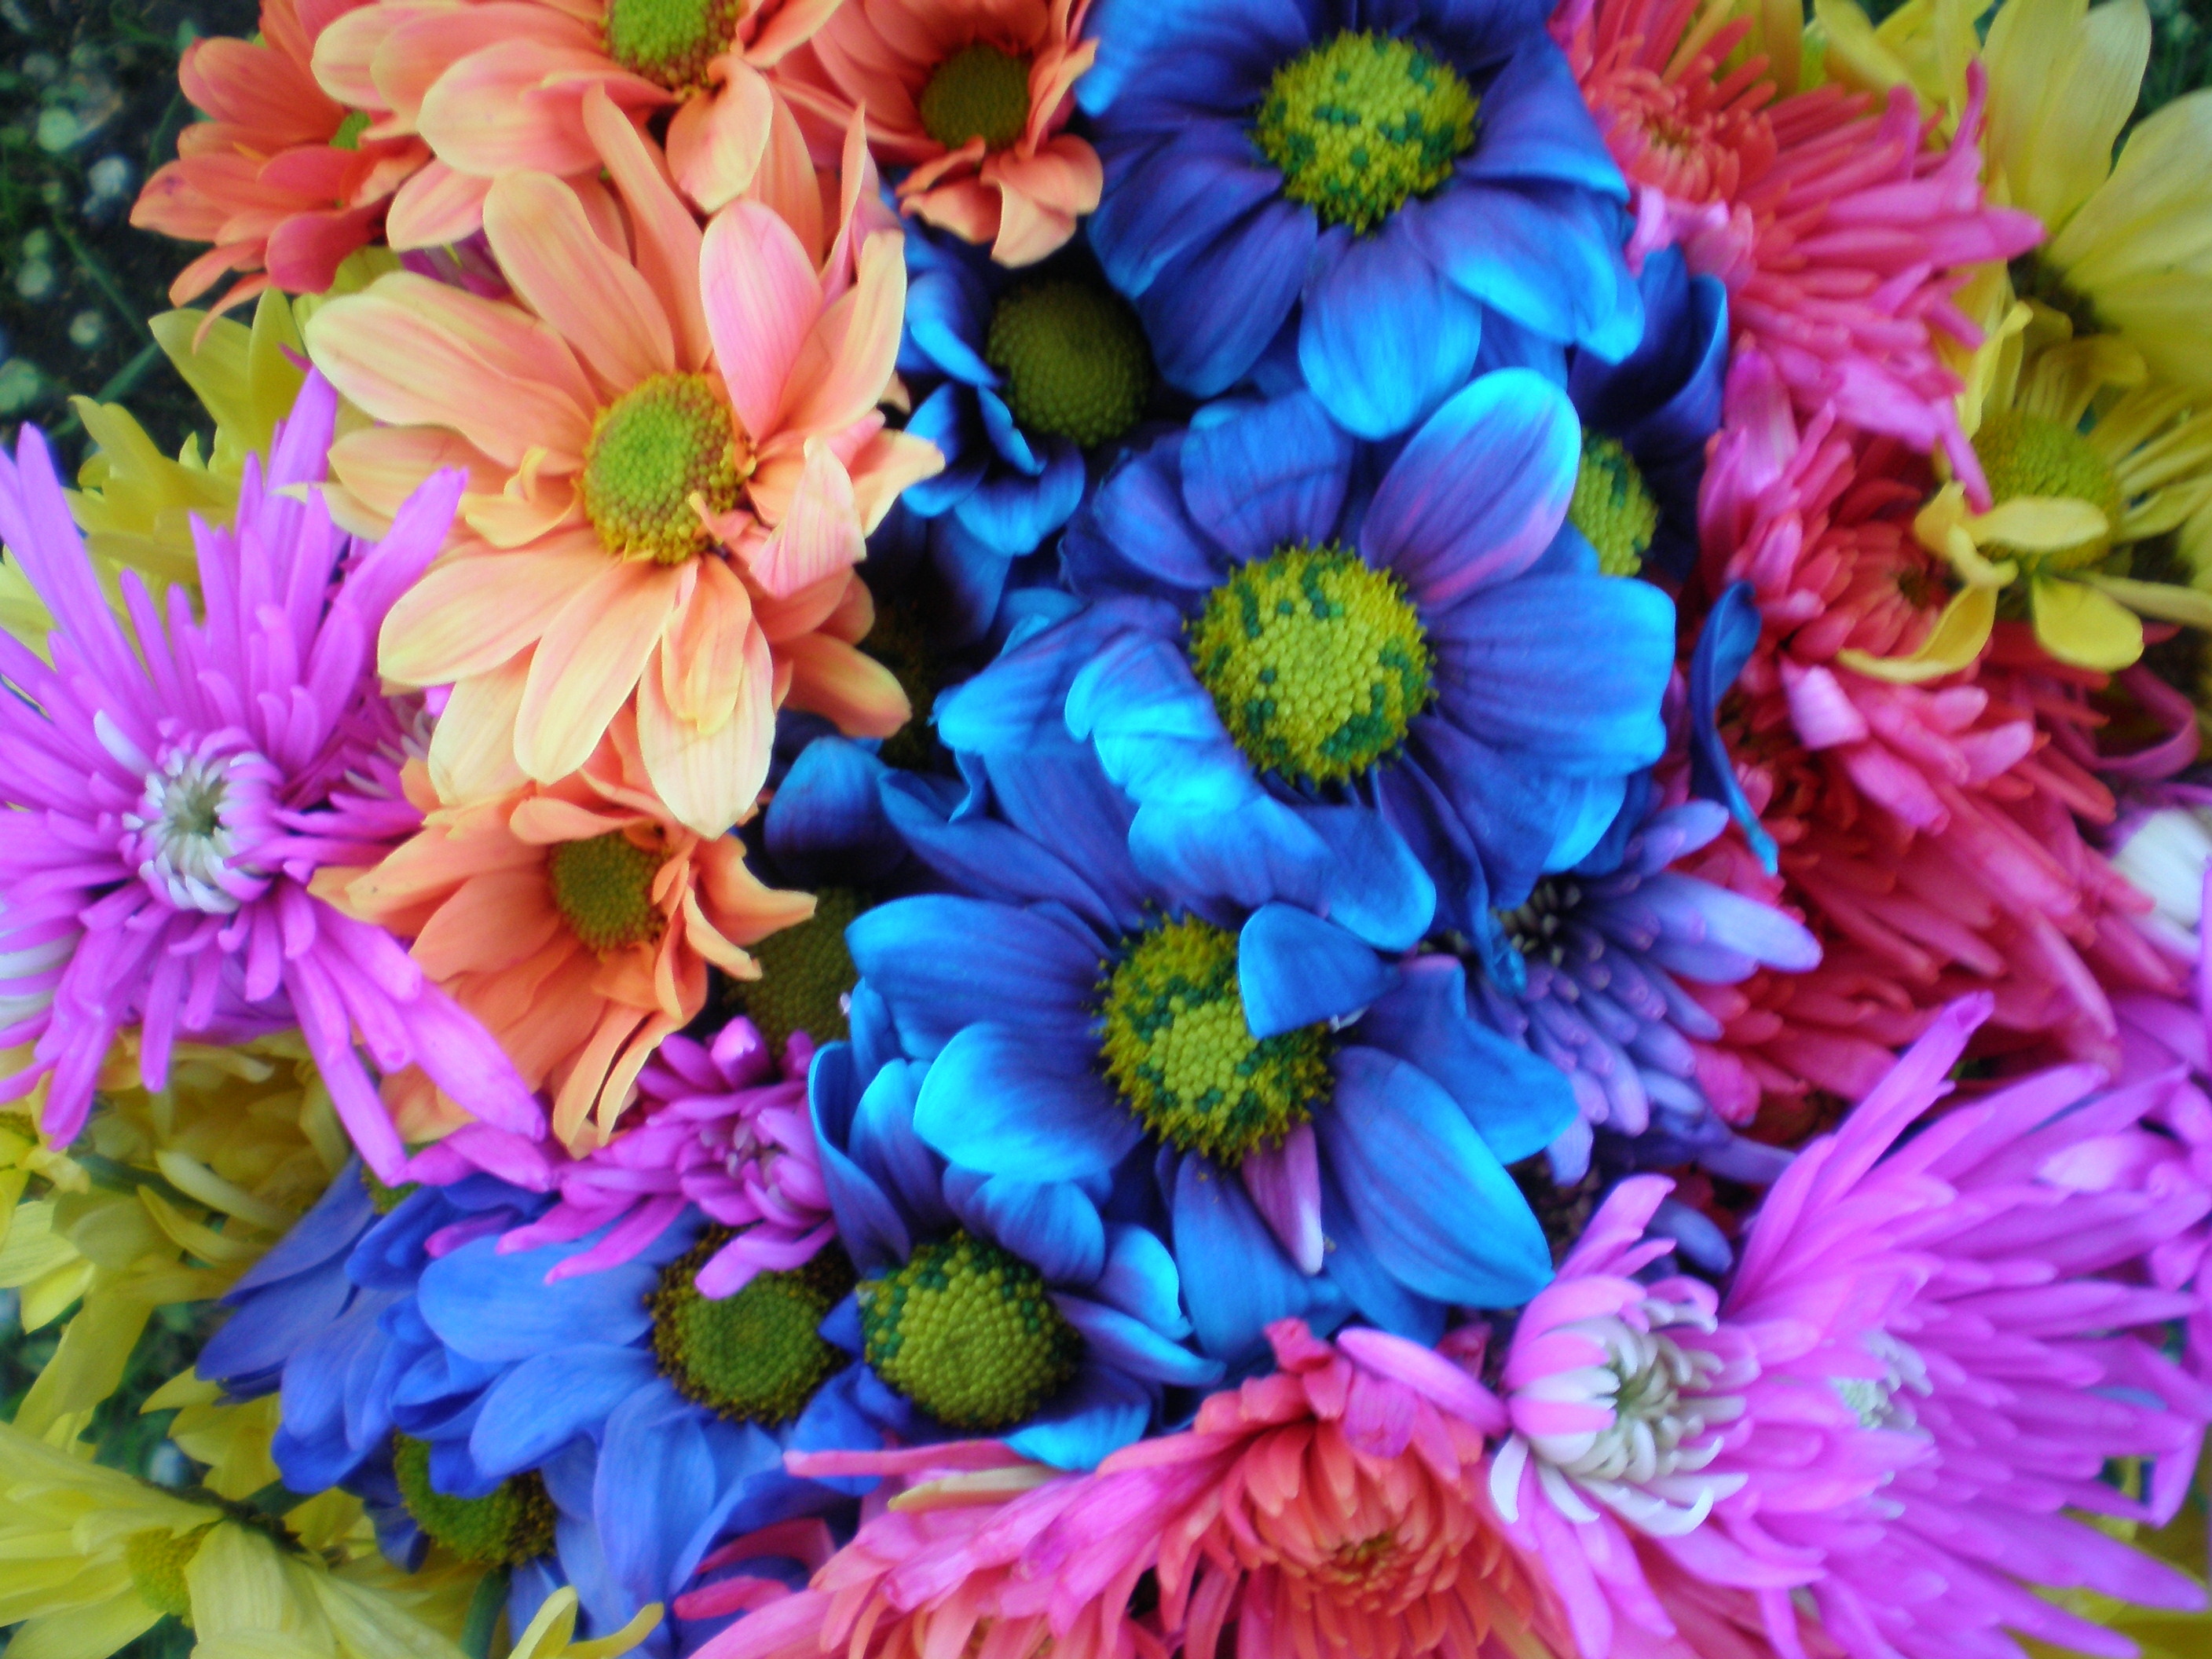 File:Colorful Crazy Daisies (4) (2530054799).jpg - Wikimedia Commons